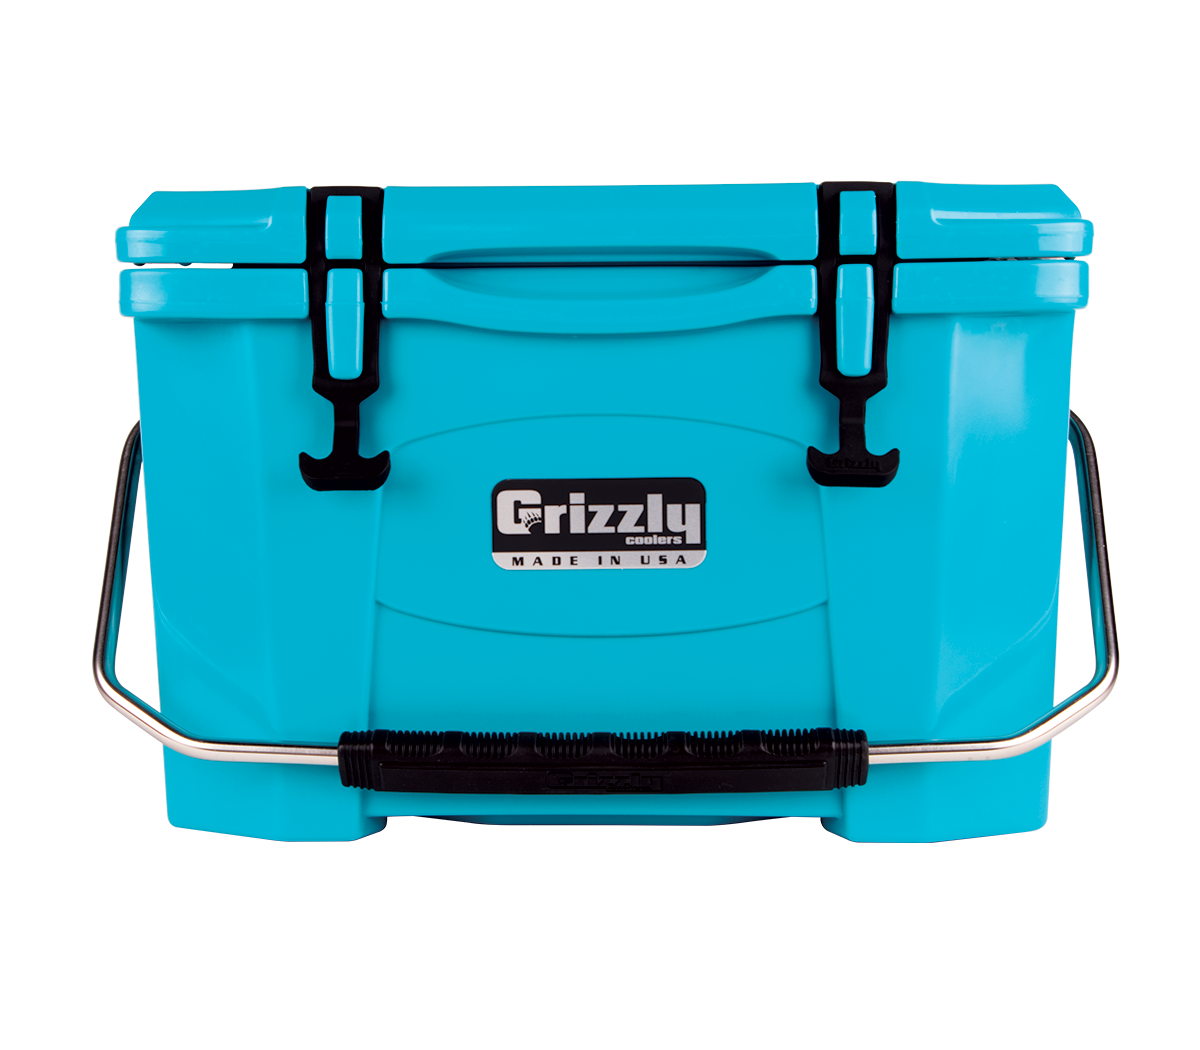 Honest Grizzly Cooler Review - All Sizes | Read Before You Buy (2020)